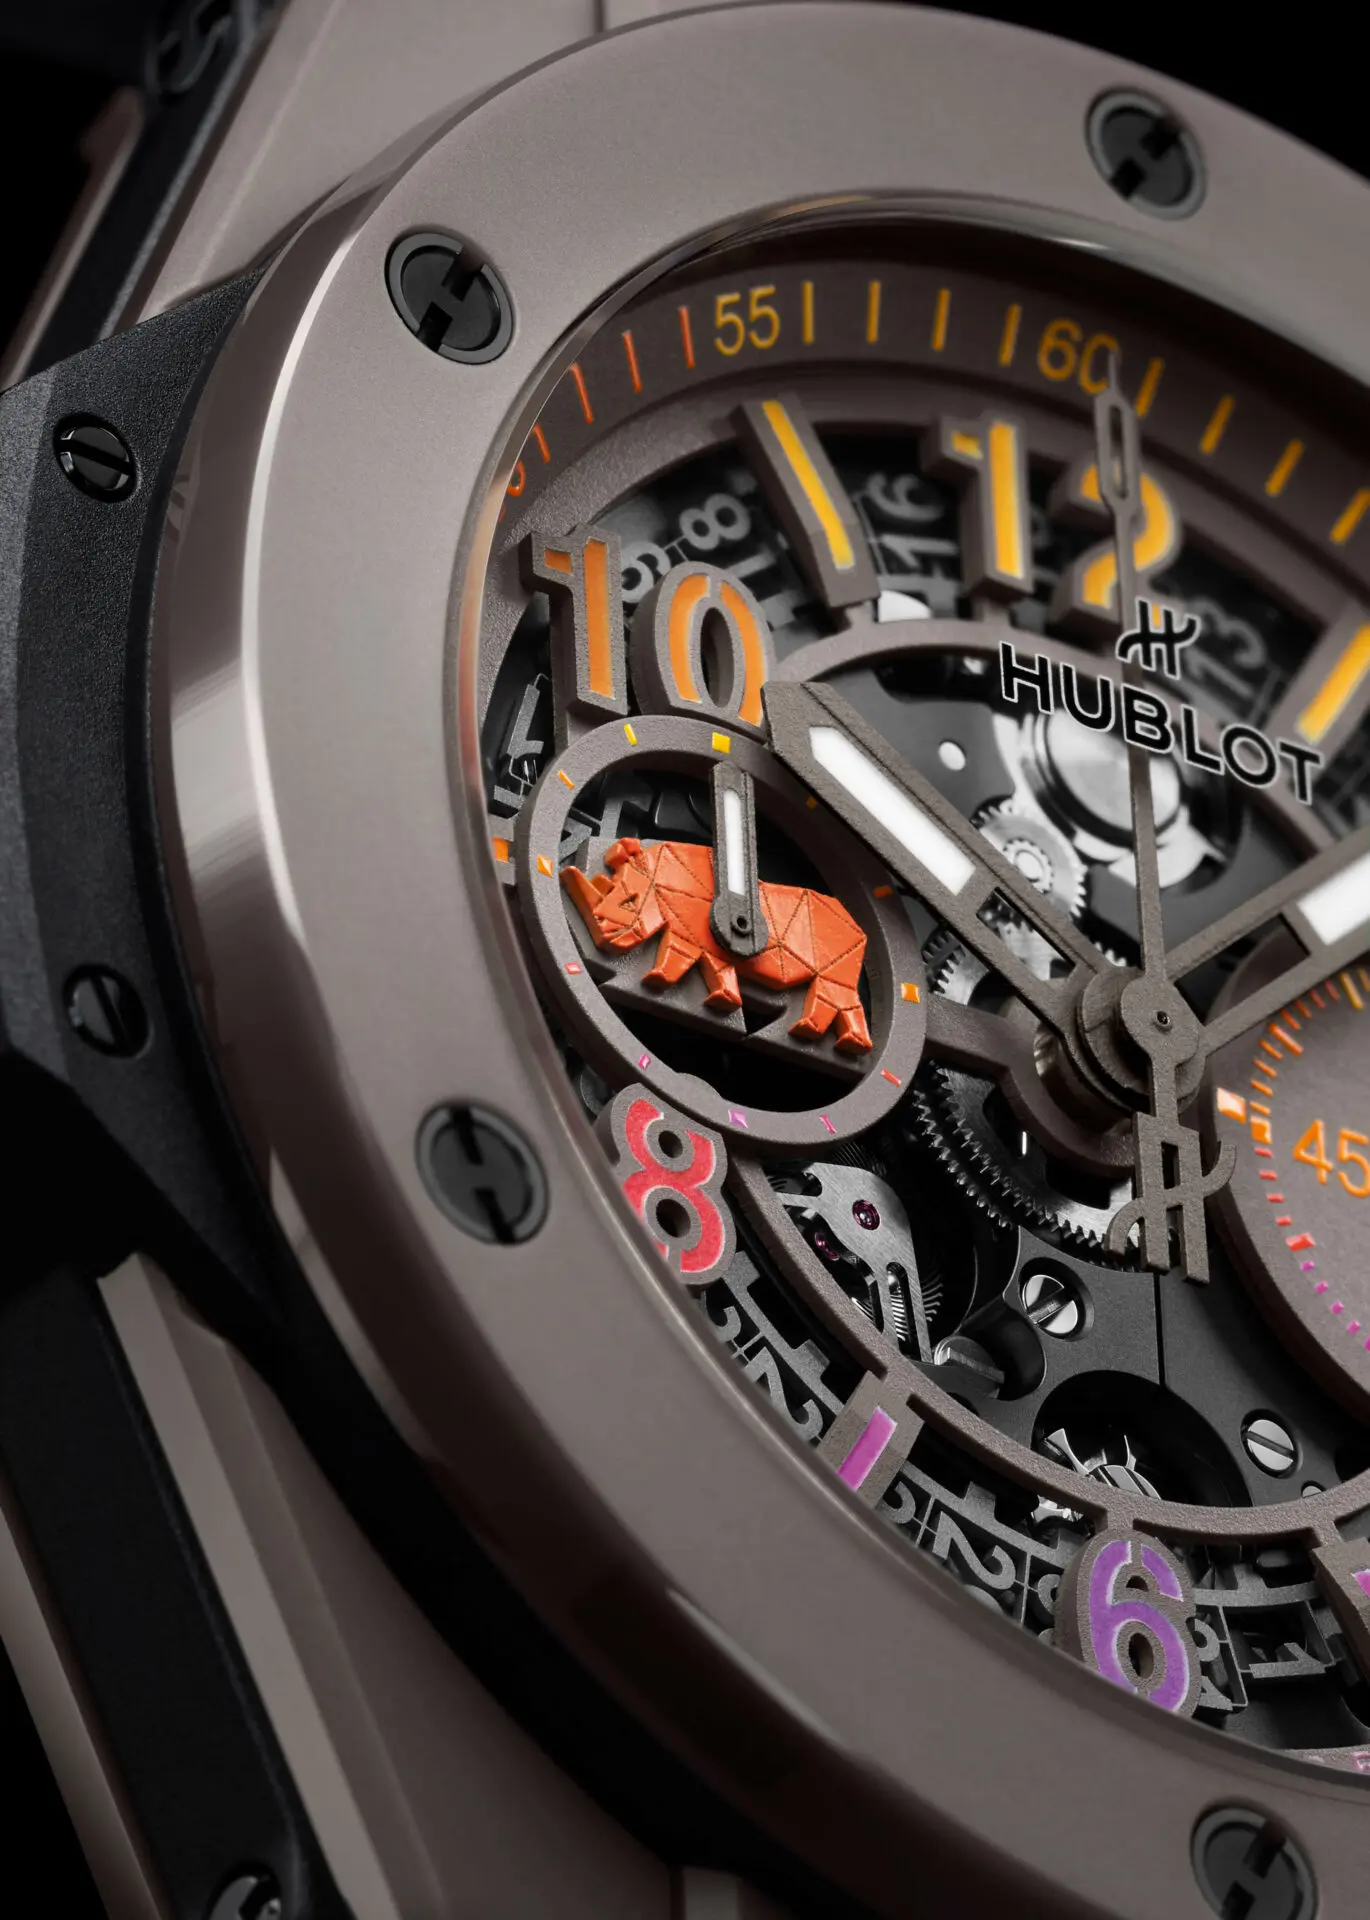 Introducing - All New Hublot Watches of LVMH Watch Week 2023